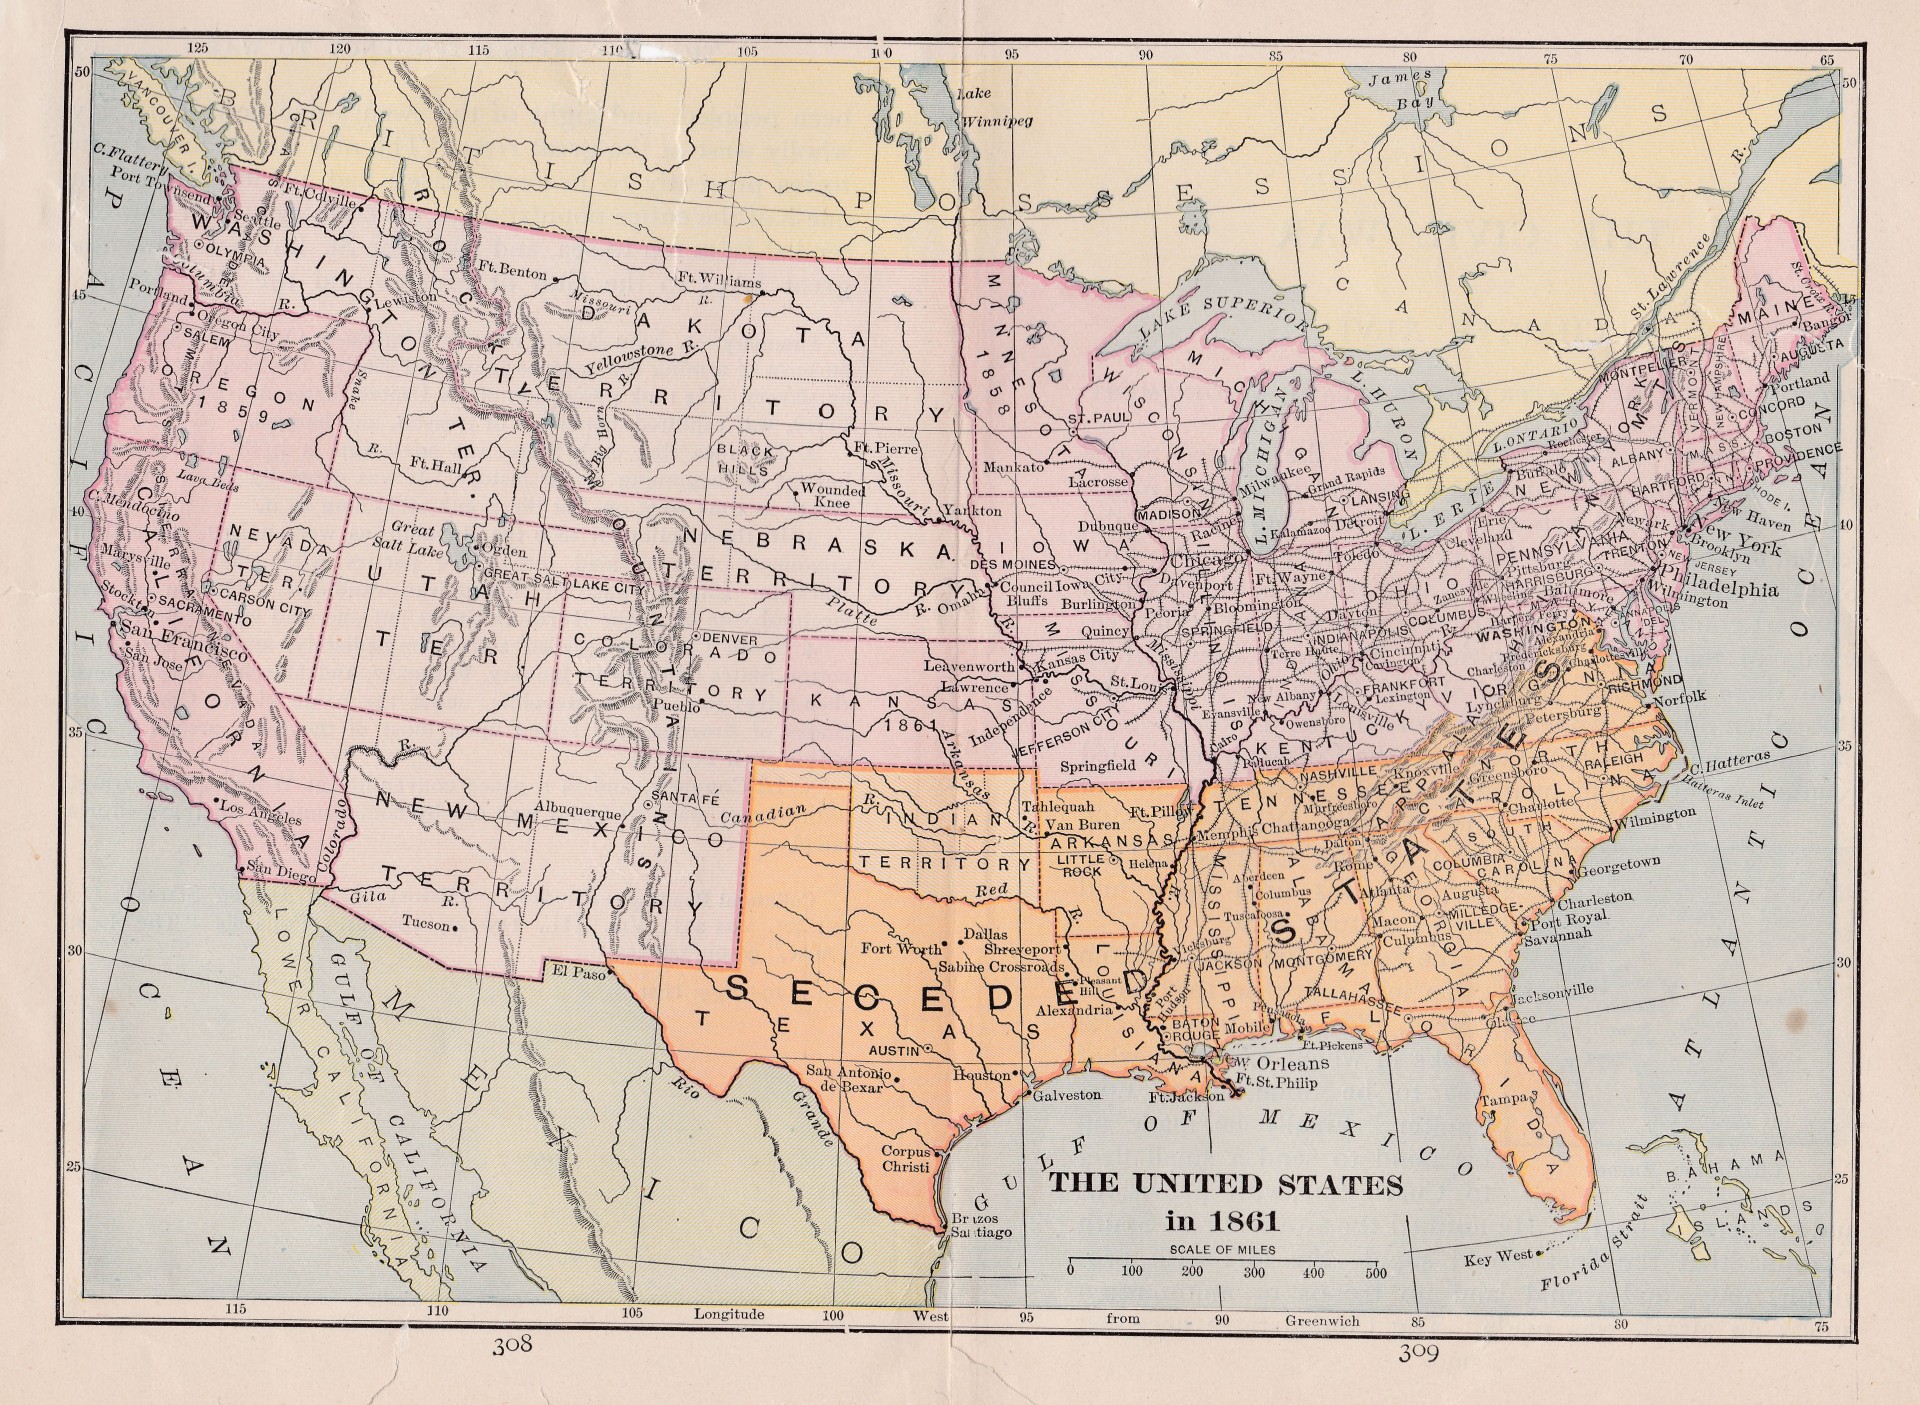 Vintage map showing information about the American Civil War